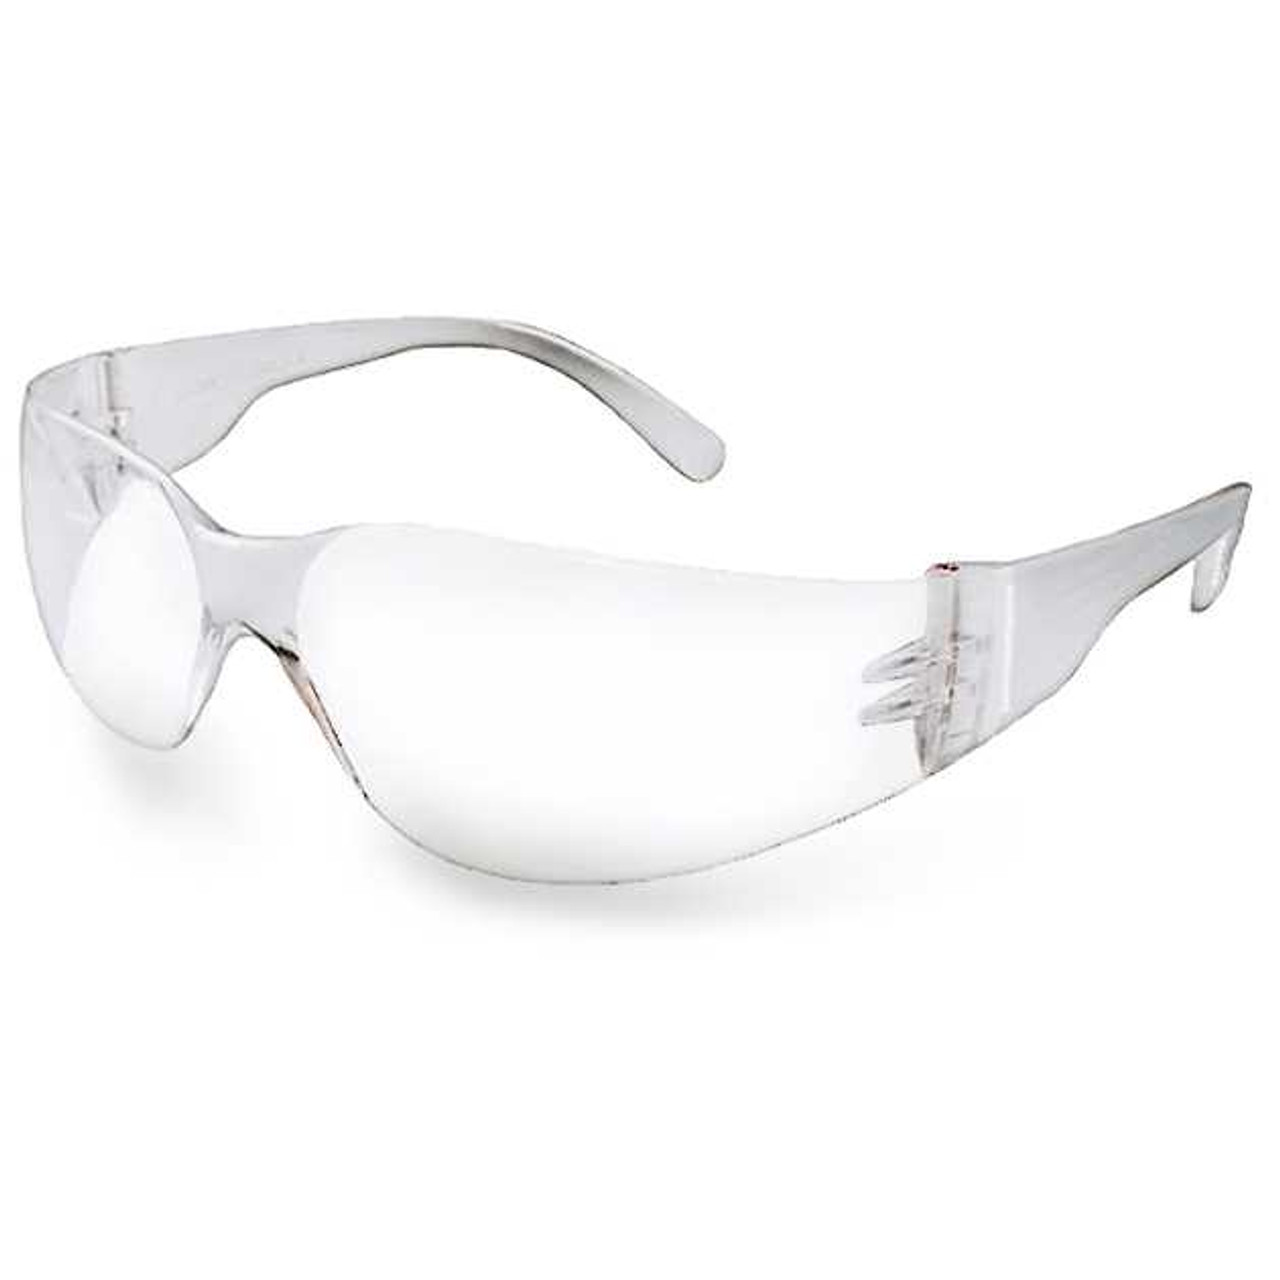 Scratch Resistant Safety Glasses (144 pairs)